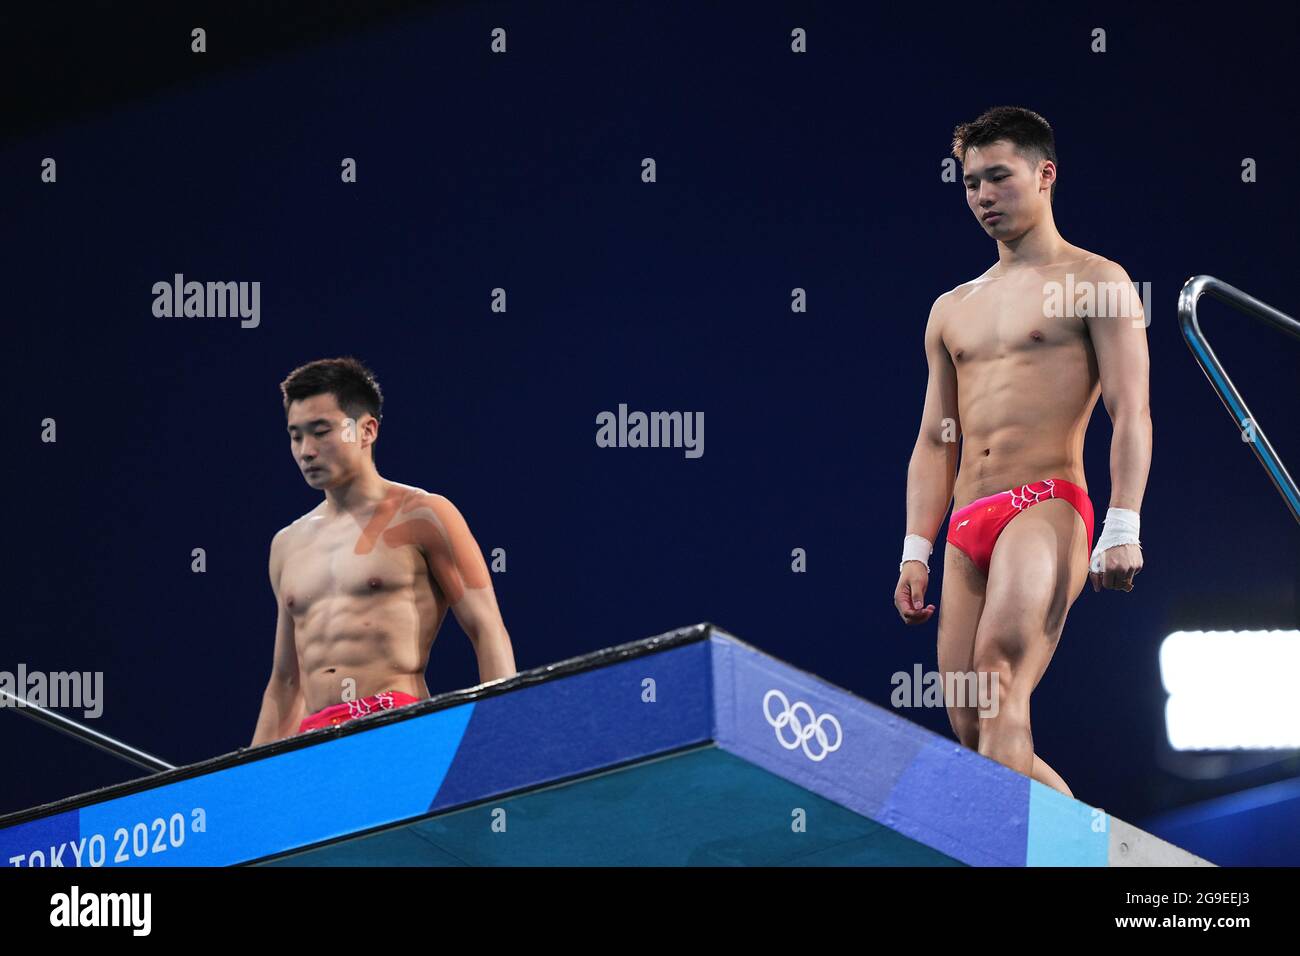 Tokyo, Japan. 26th July, 2021. Cao Yuan and Chen Aisen of China compete during the men's synchronised 10m platform final of diving at Tokyo 2020 Olympic Games in Tokyo, Japan, July 26, 2021. Credit: Xu Chang/Xinhua/Alamy Live News Stock Photo